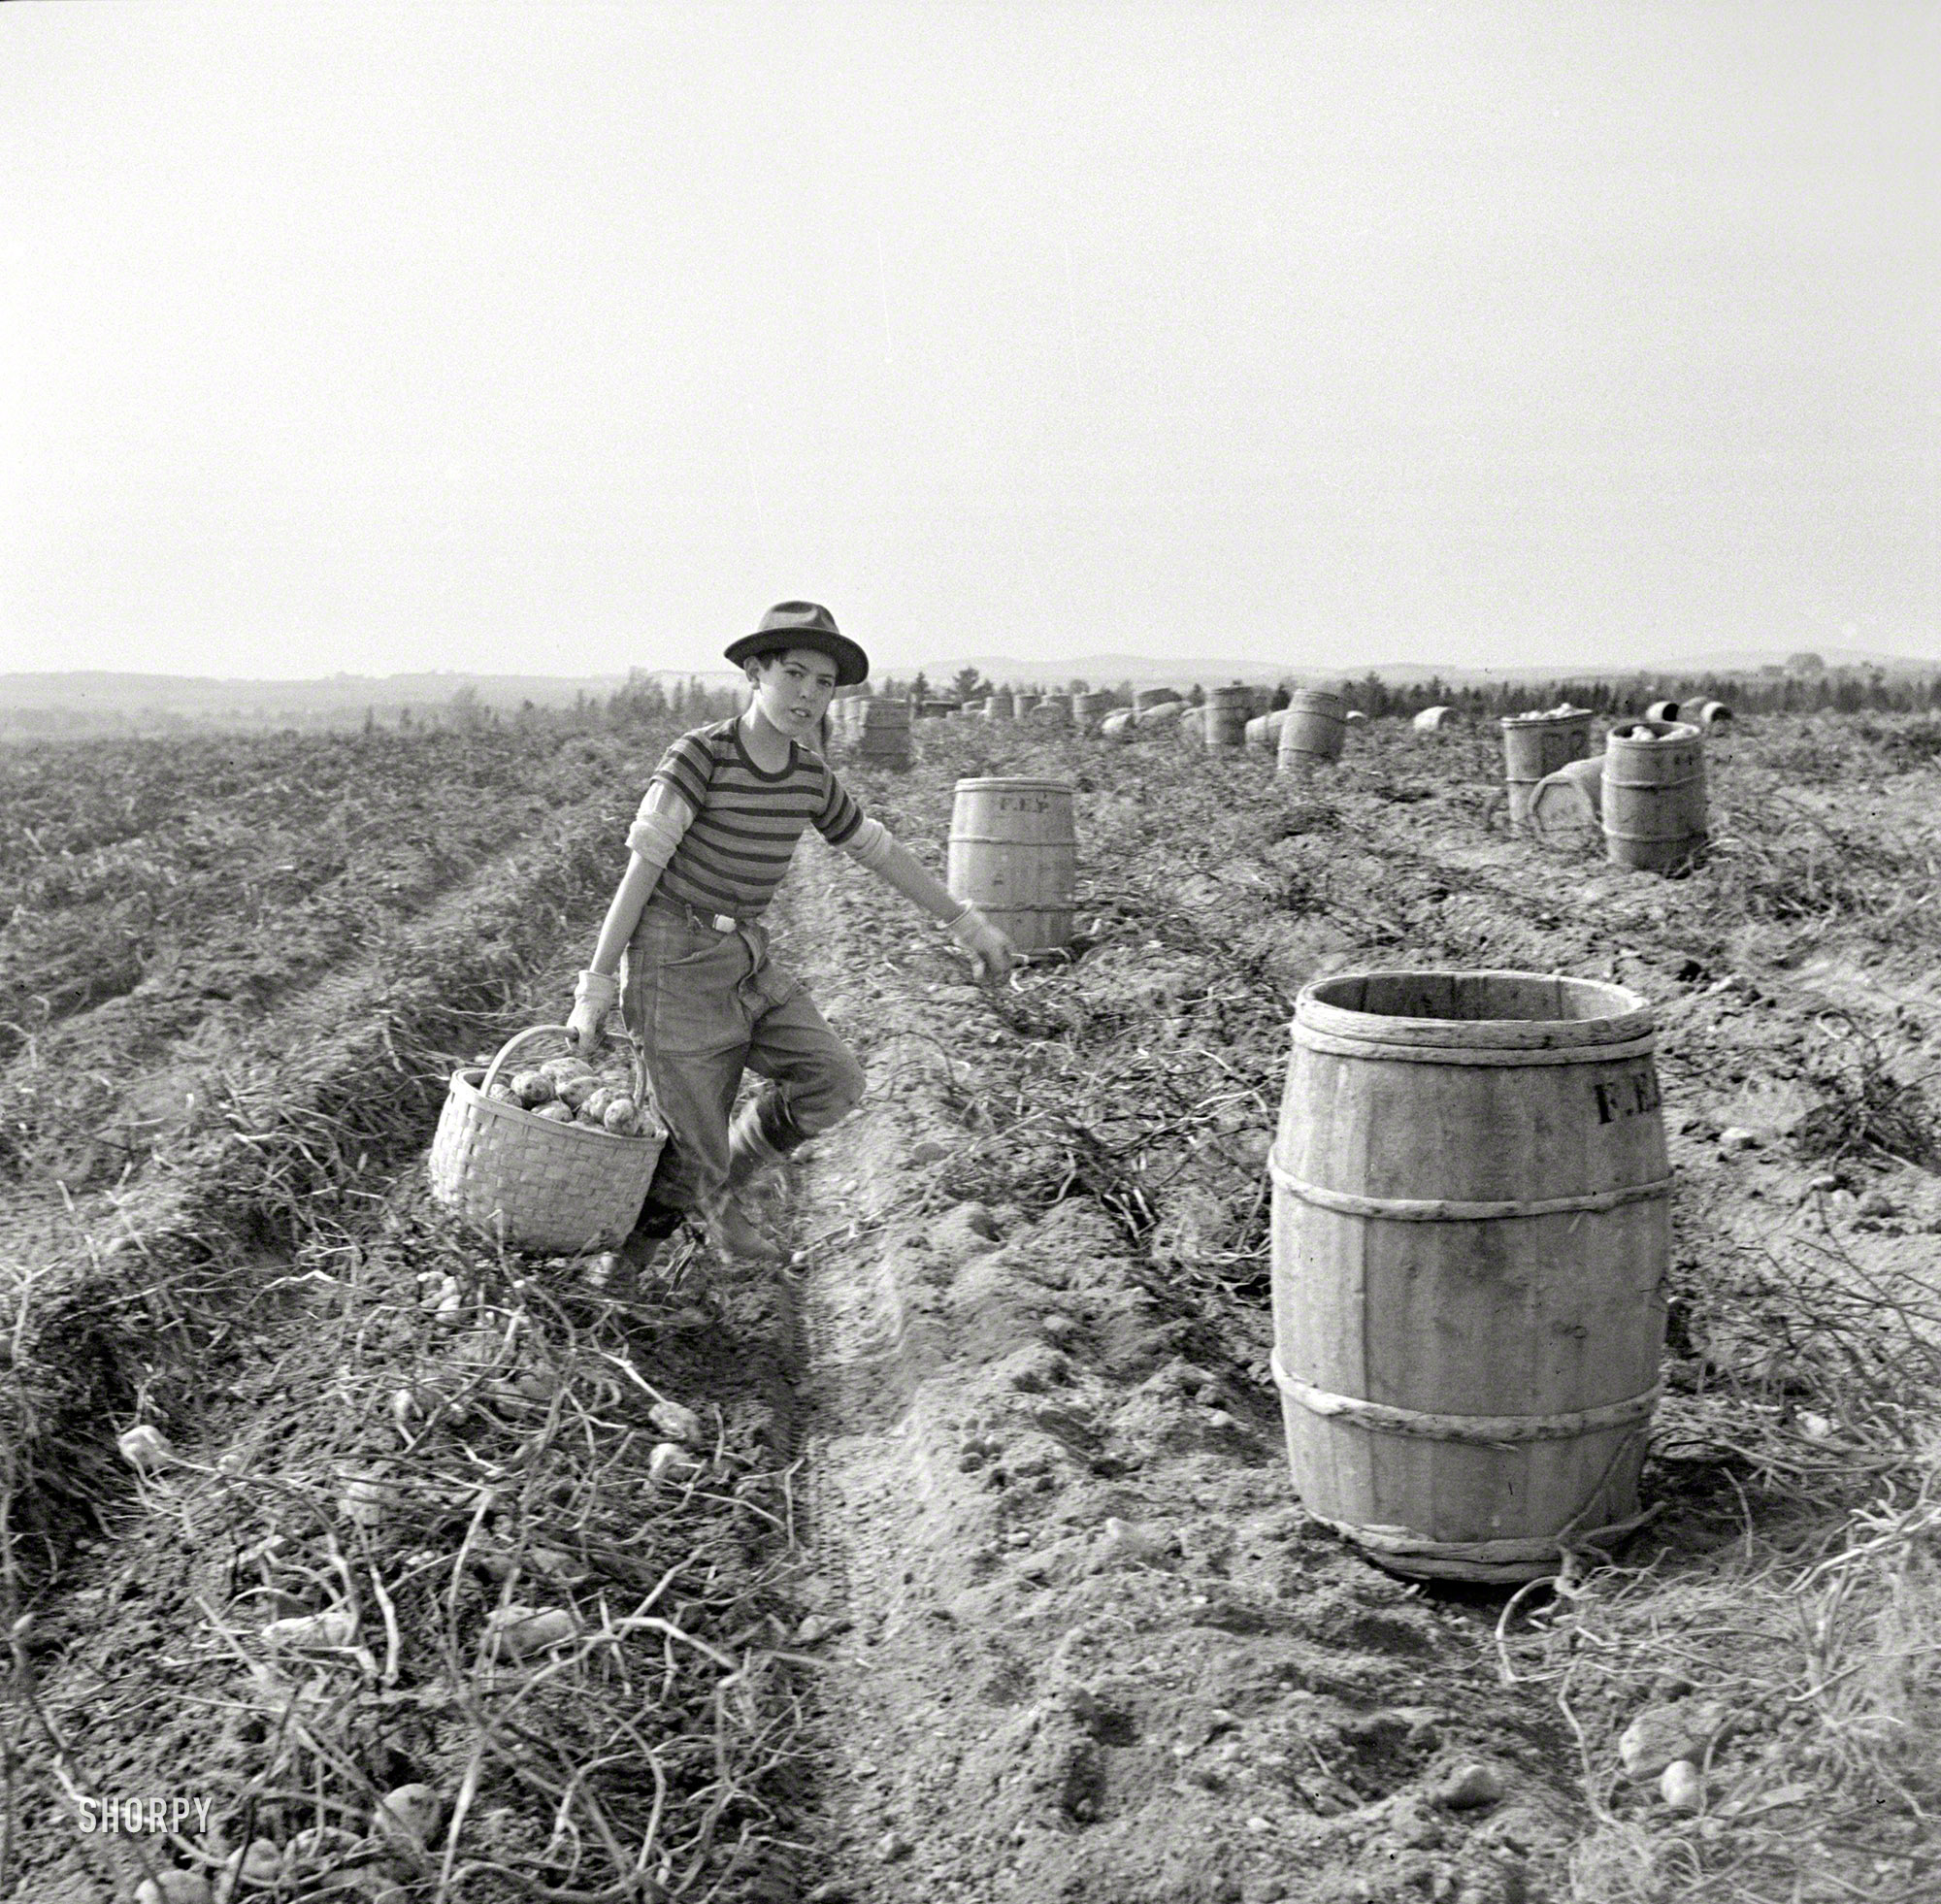 October 1940. "Near Caribou, Maine. The opening of school was delayed in sections of Aroostook County so children could help pick potatoes." Does this beat Introduction to Algebra? Photo by Jack Delano. View full size.